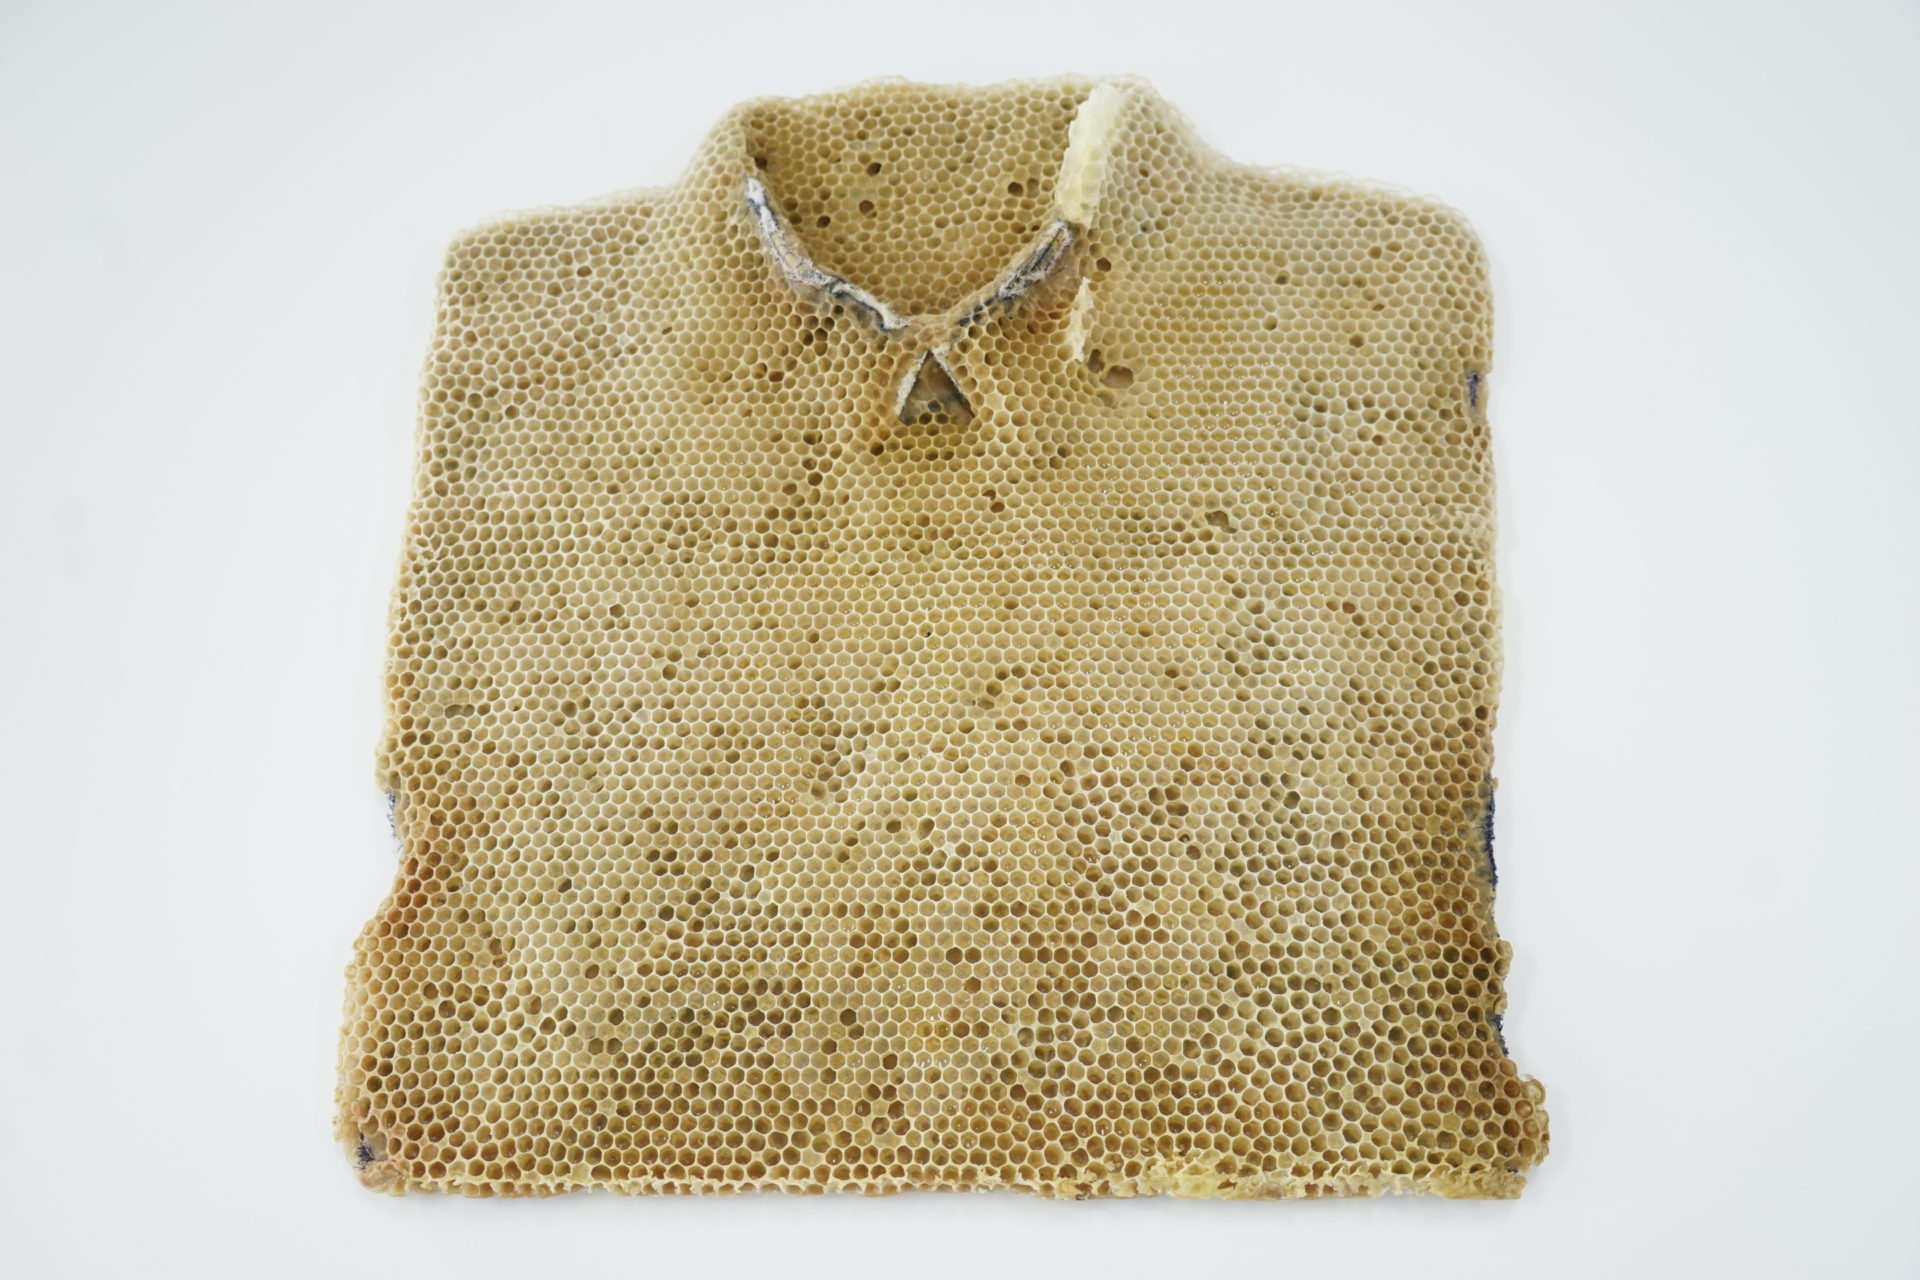 Franz Ehmann, 'Fourteen Days', 2018, Beeswax on cotton shirts with resin buttons